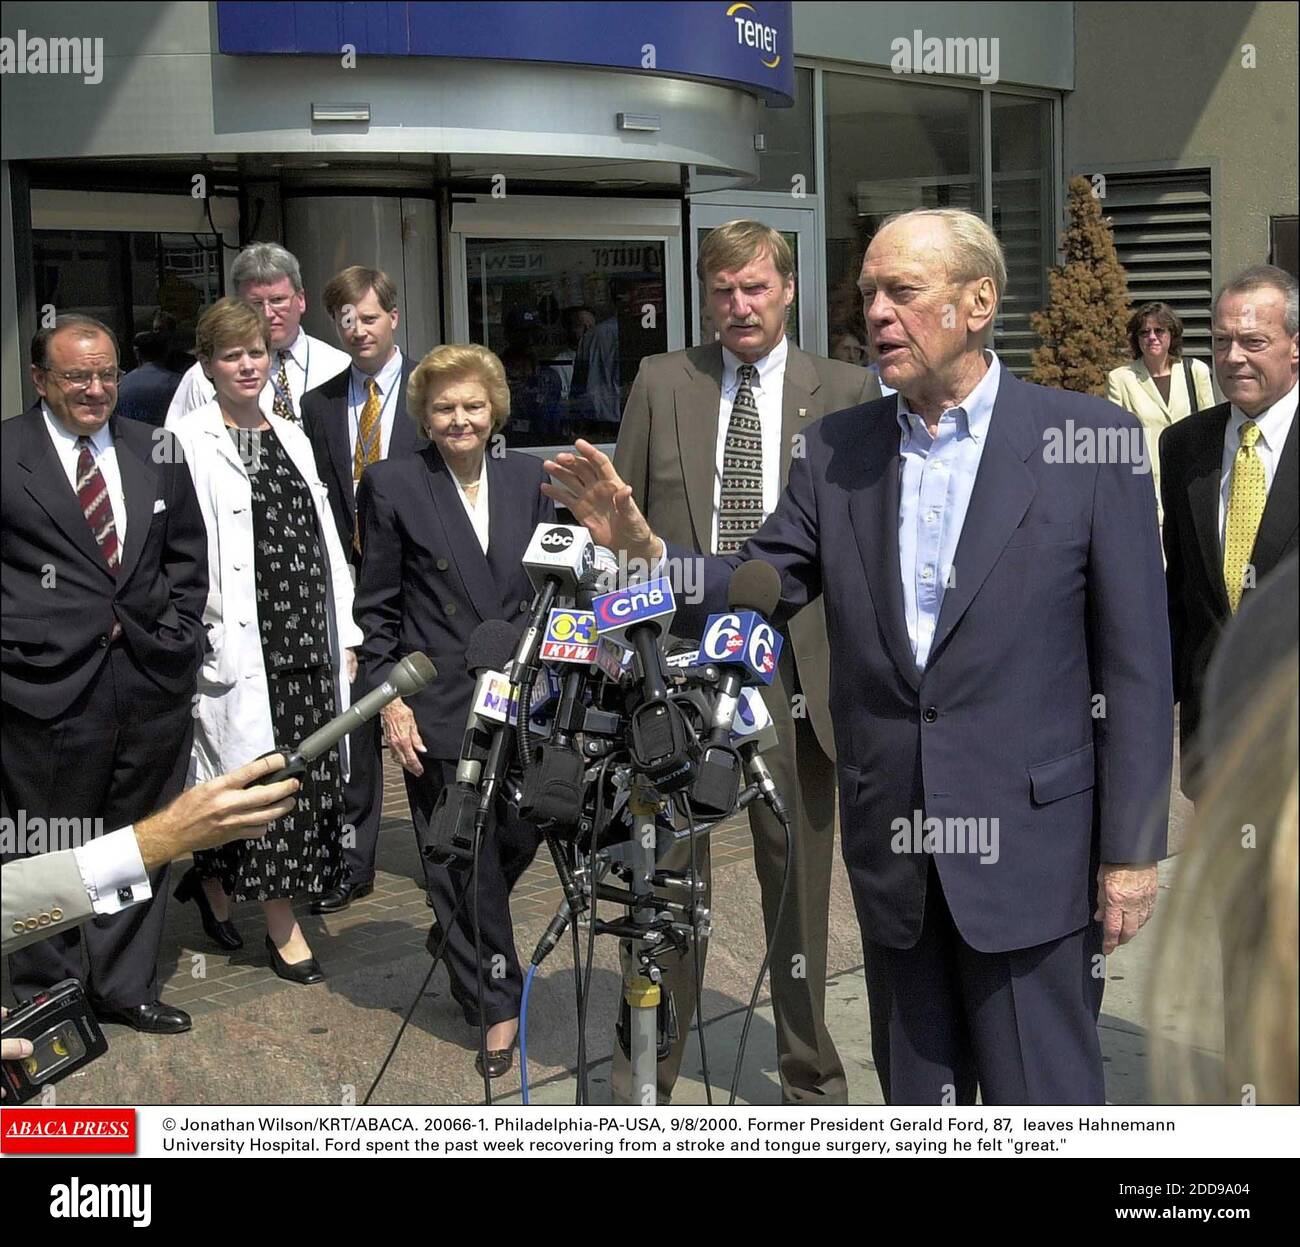 NO FILM, NO VIDEO, NO TV, NO DOCUMENTARY - © Jonathan Wilson/KRT/ABACA. 20066-1. Philadelphia-PA-USA, 9/8/2000. Former President Gerald Ford, 87, leaves Hahnemann University Hospital. Ford spent the past week recovering from a stroke and tongue surgery, saying he felt great. Stock Photo